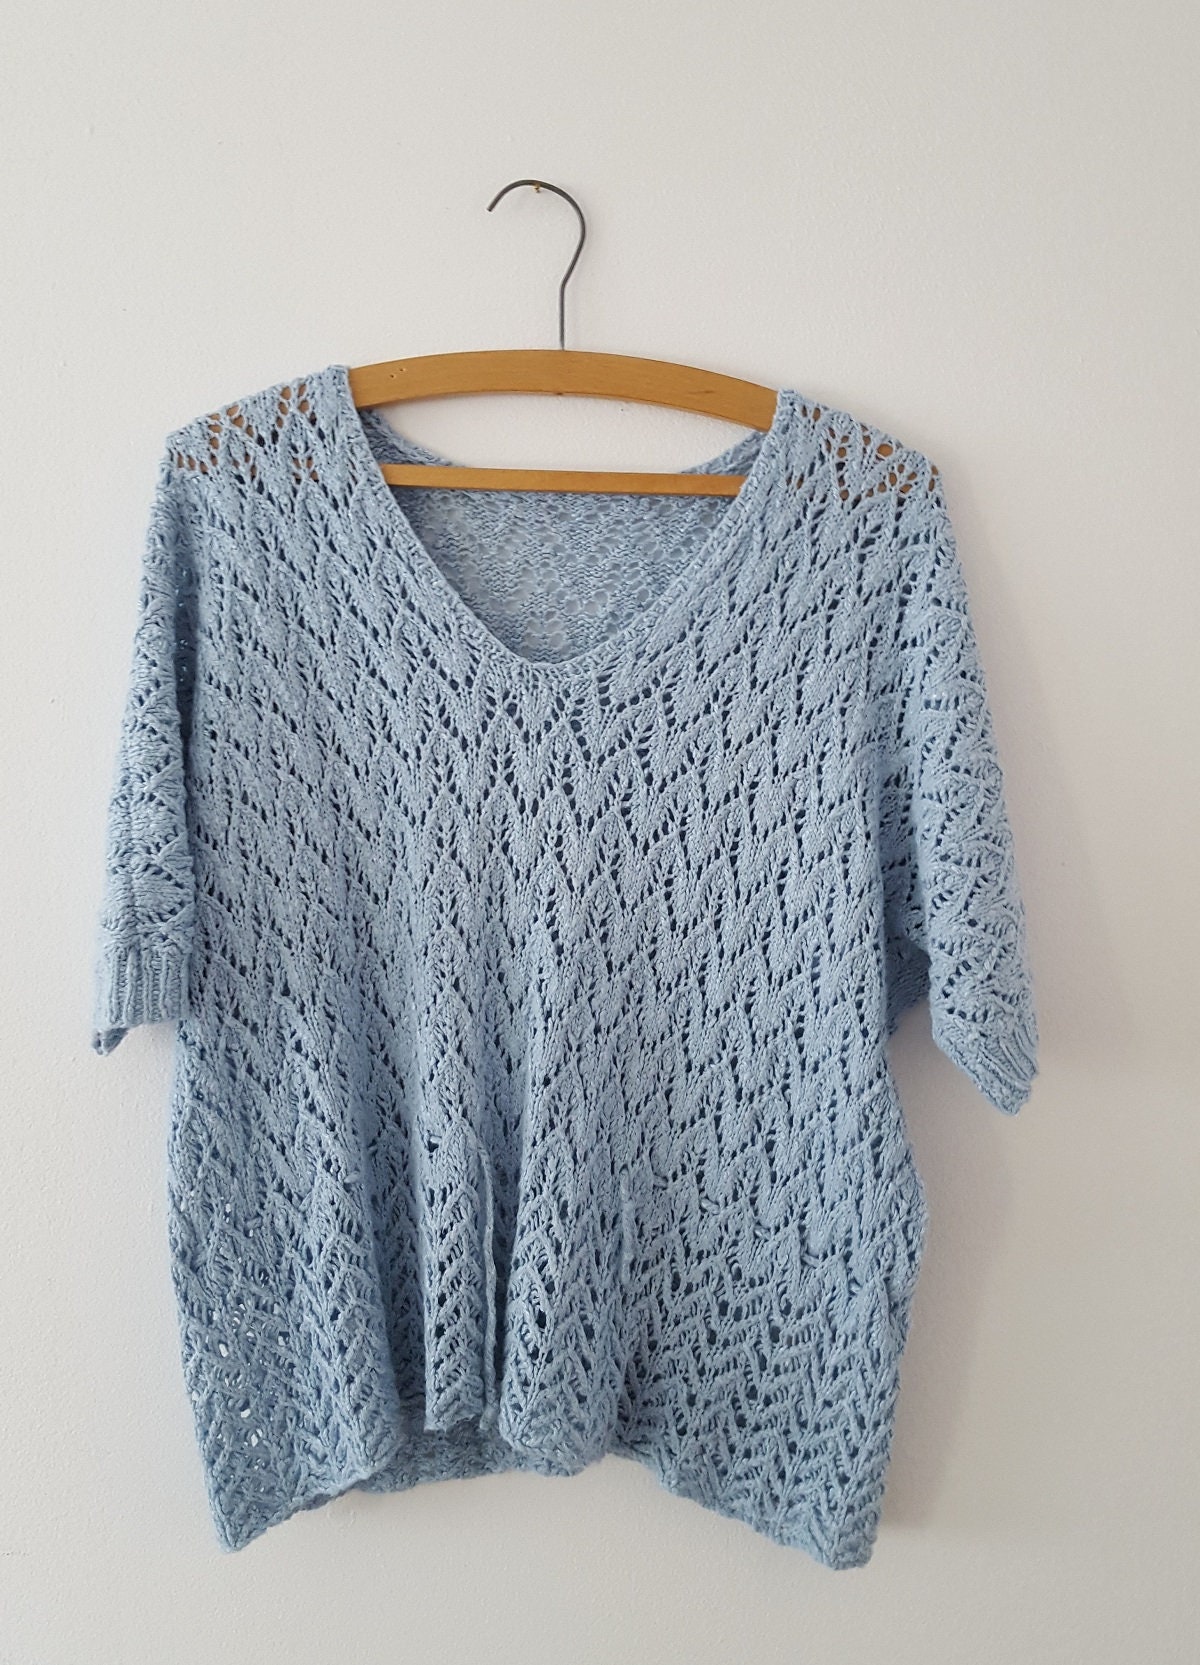 Knitting Pattern for Lace Sweater Sea Holly - Etsy